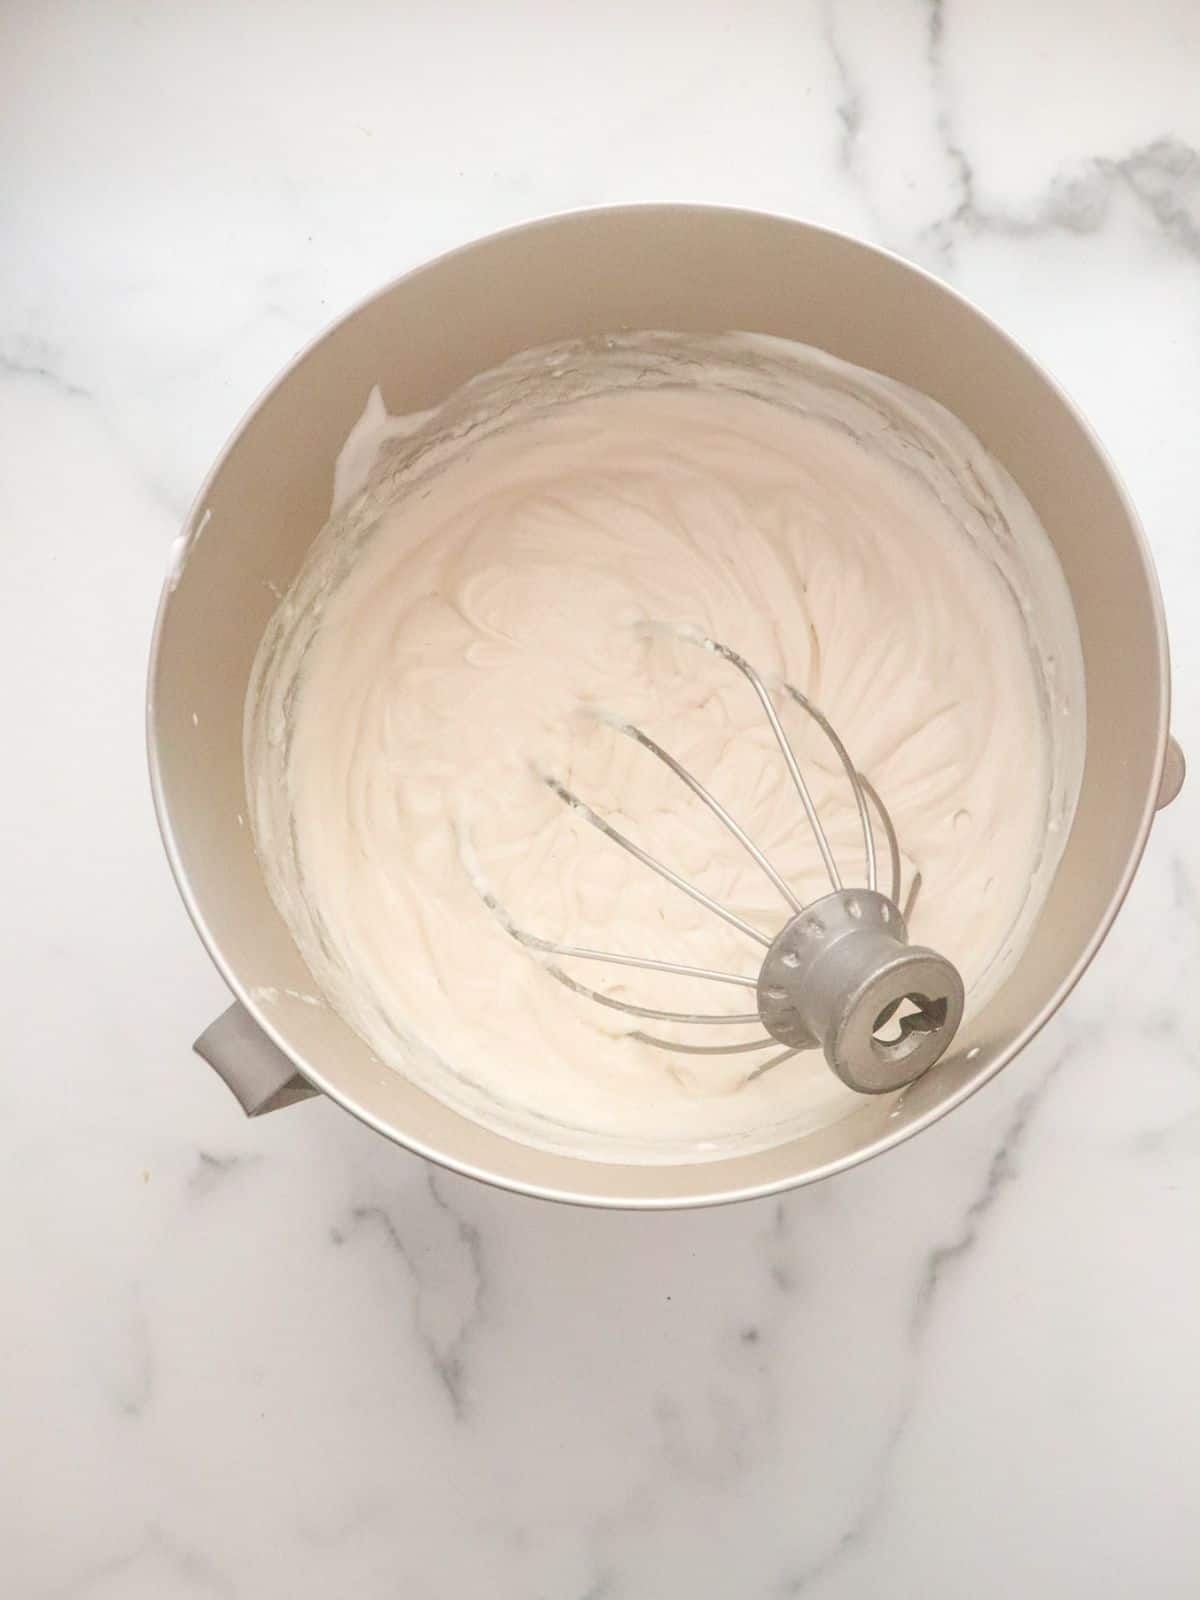 Whipped cream cheese in bowl with whisk